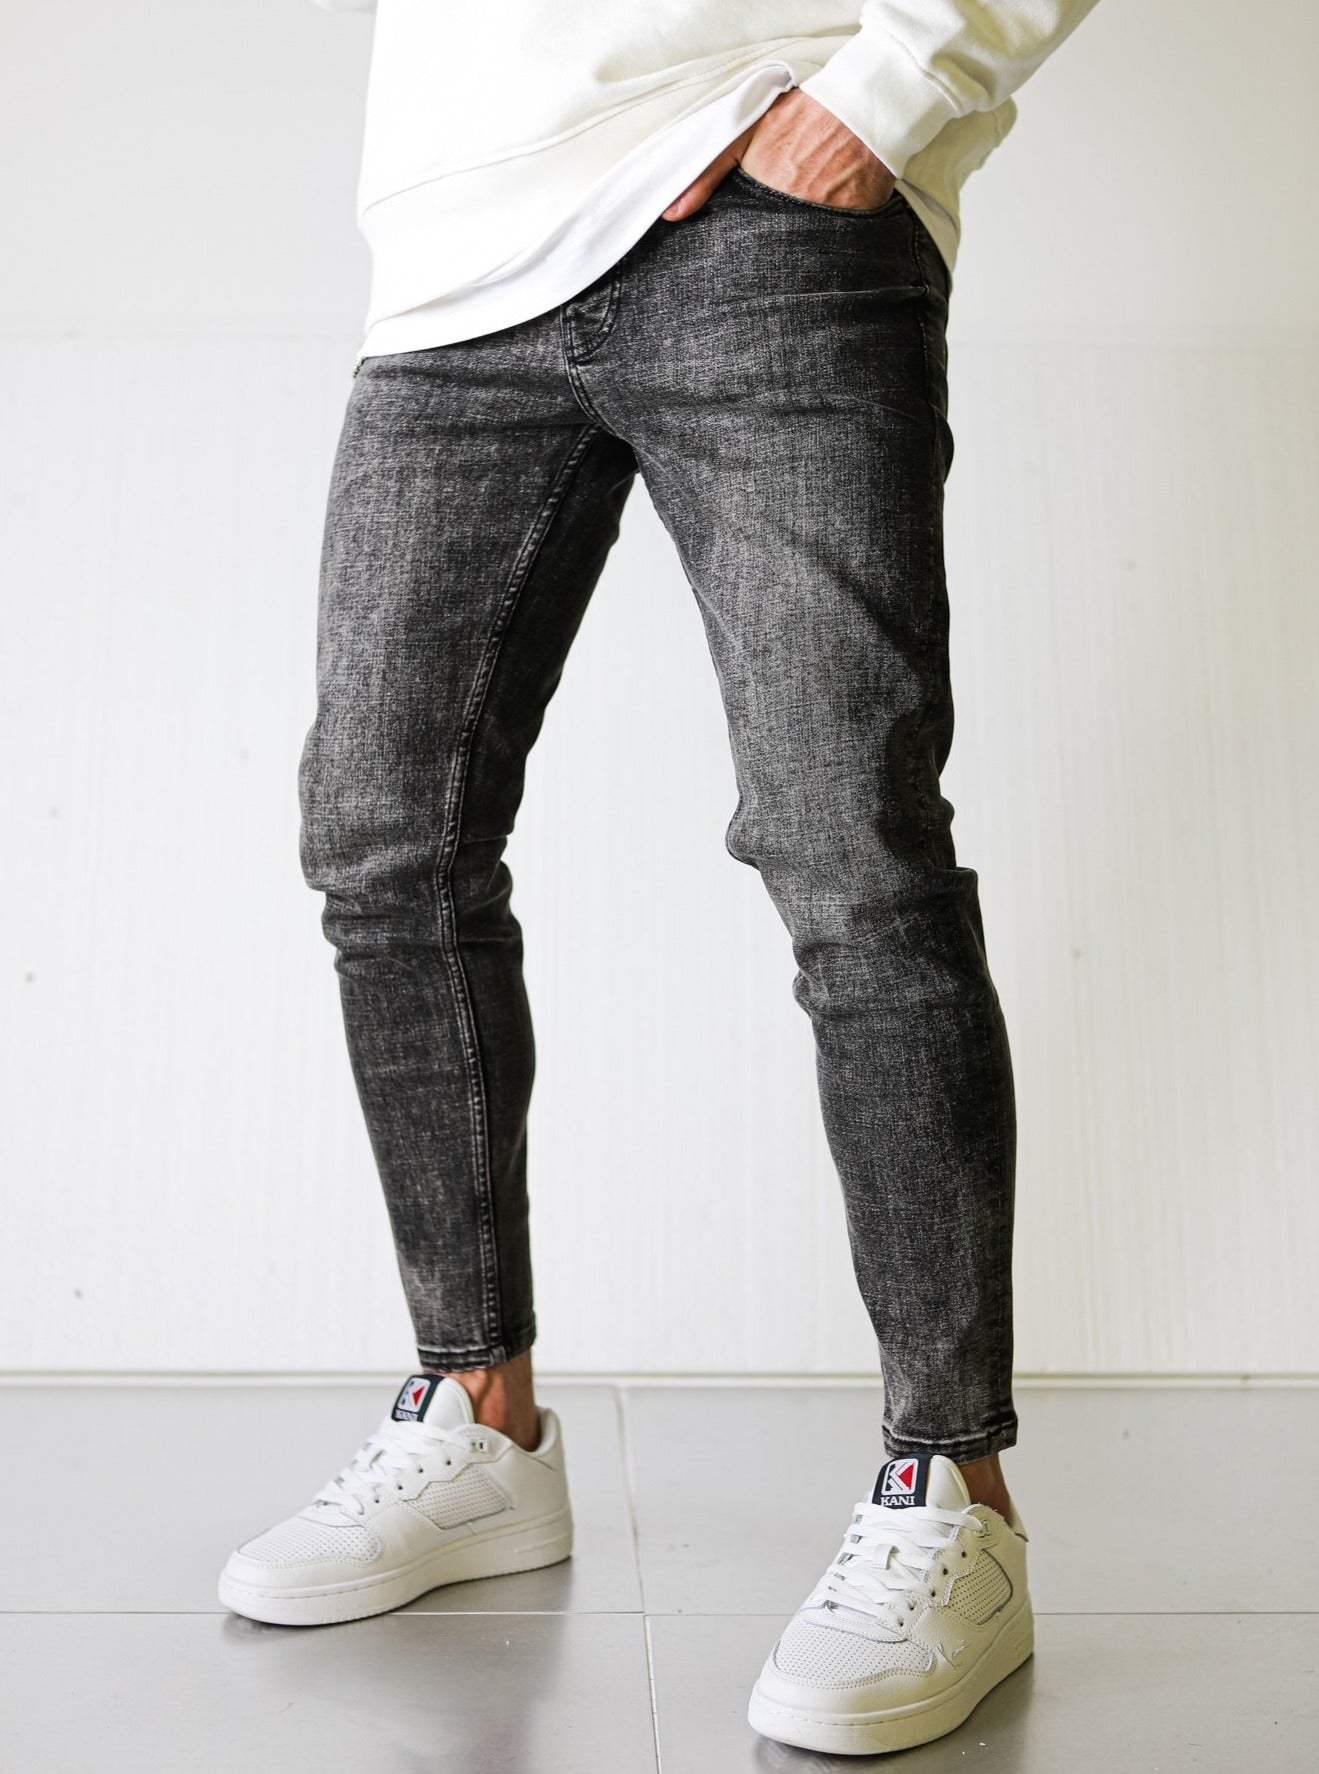 Spray-On Basic Grey Jeans - UNEFFECTED STUDIOS® - JEANS - UNEFFECTED